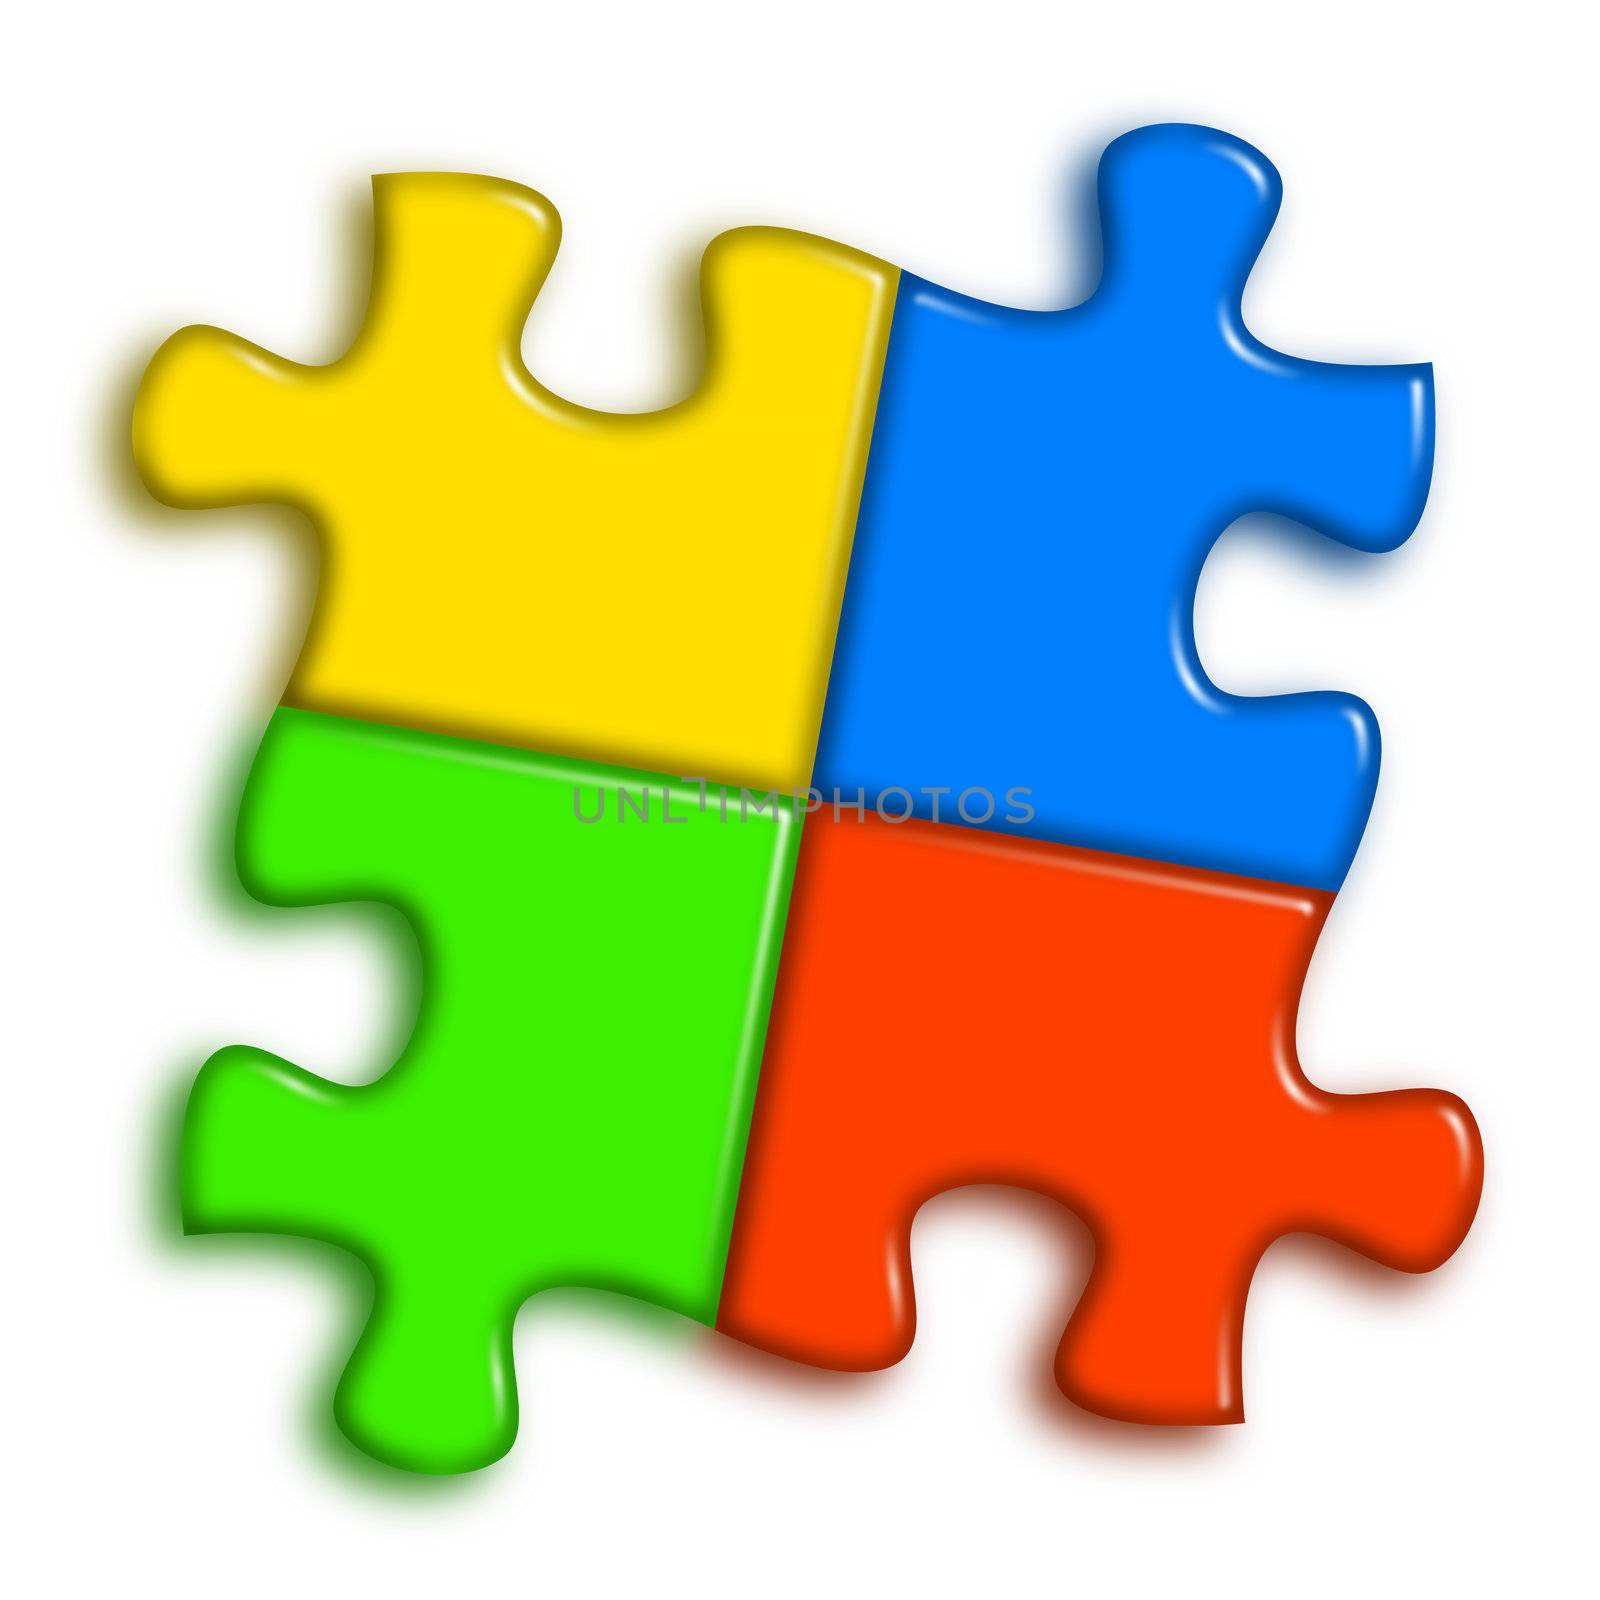 Combined multi-color puzzle representing cooperation and team work concept